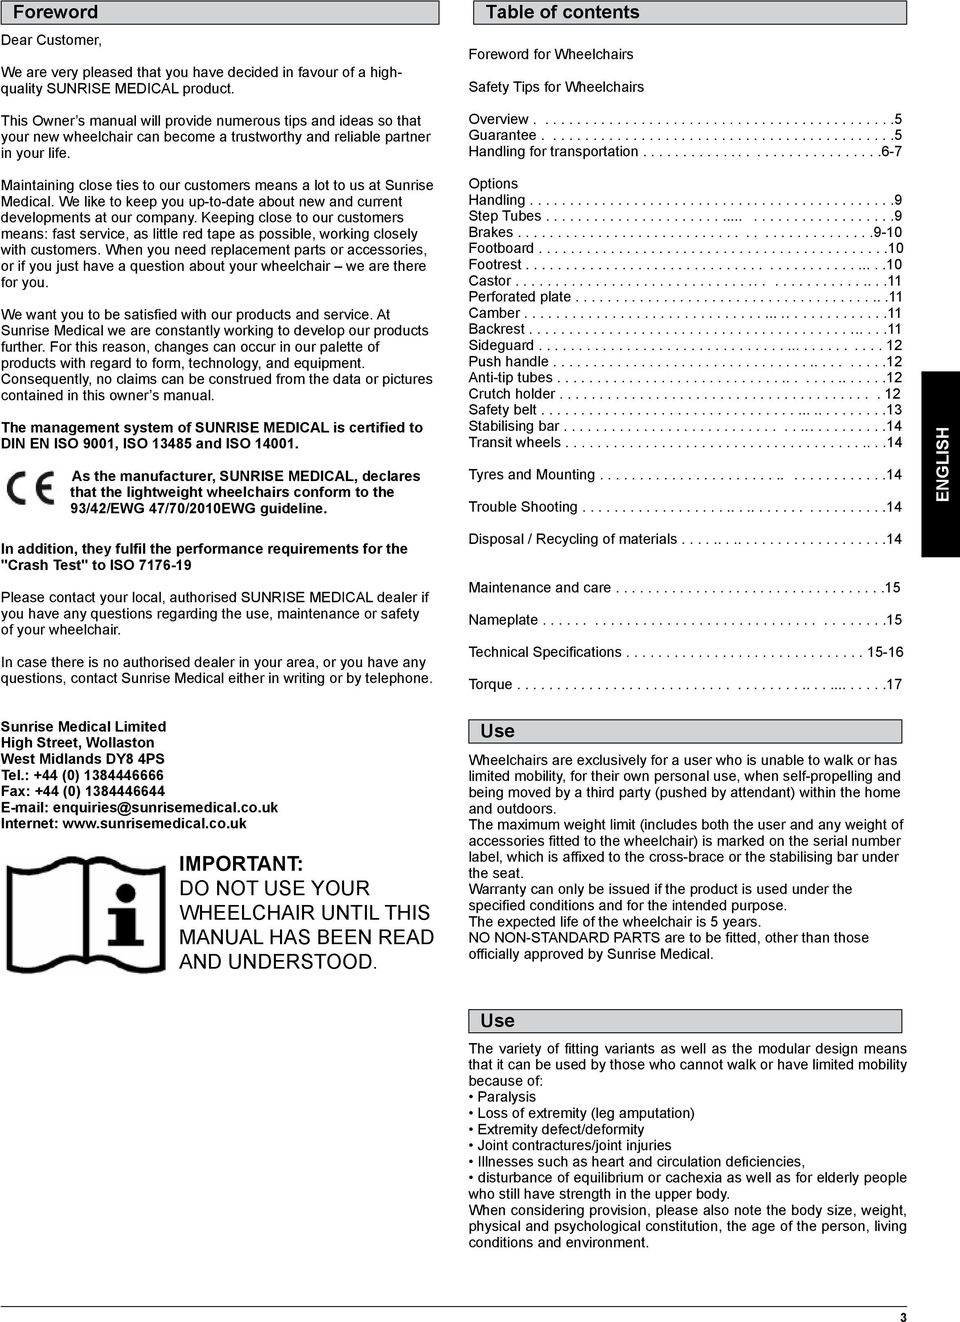 Table of contents Foreword for Wheelchairs Safety Tips for Wheelchairs Overview.............................................5 Guarantee............................................5 Handling for transportation.